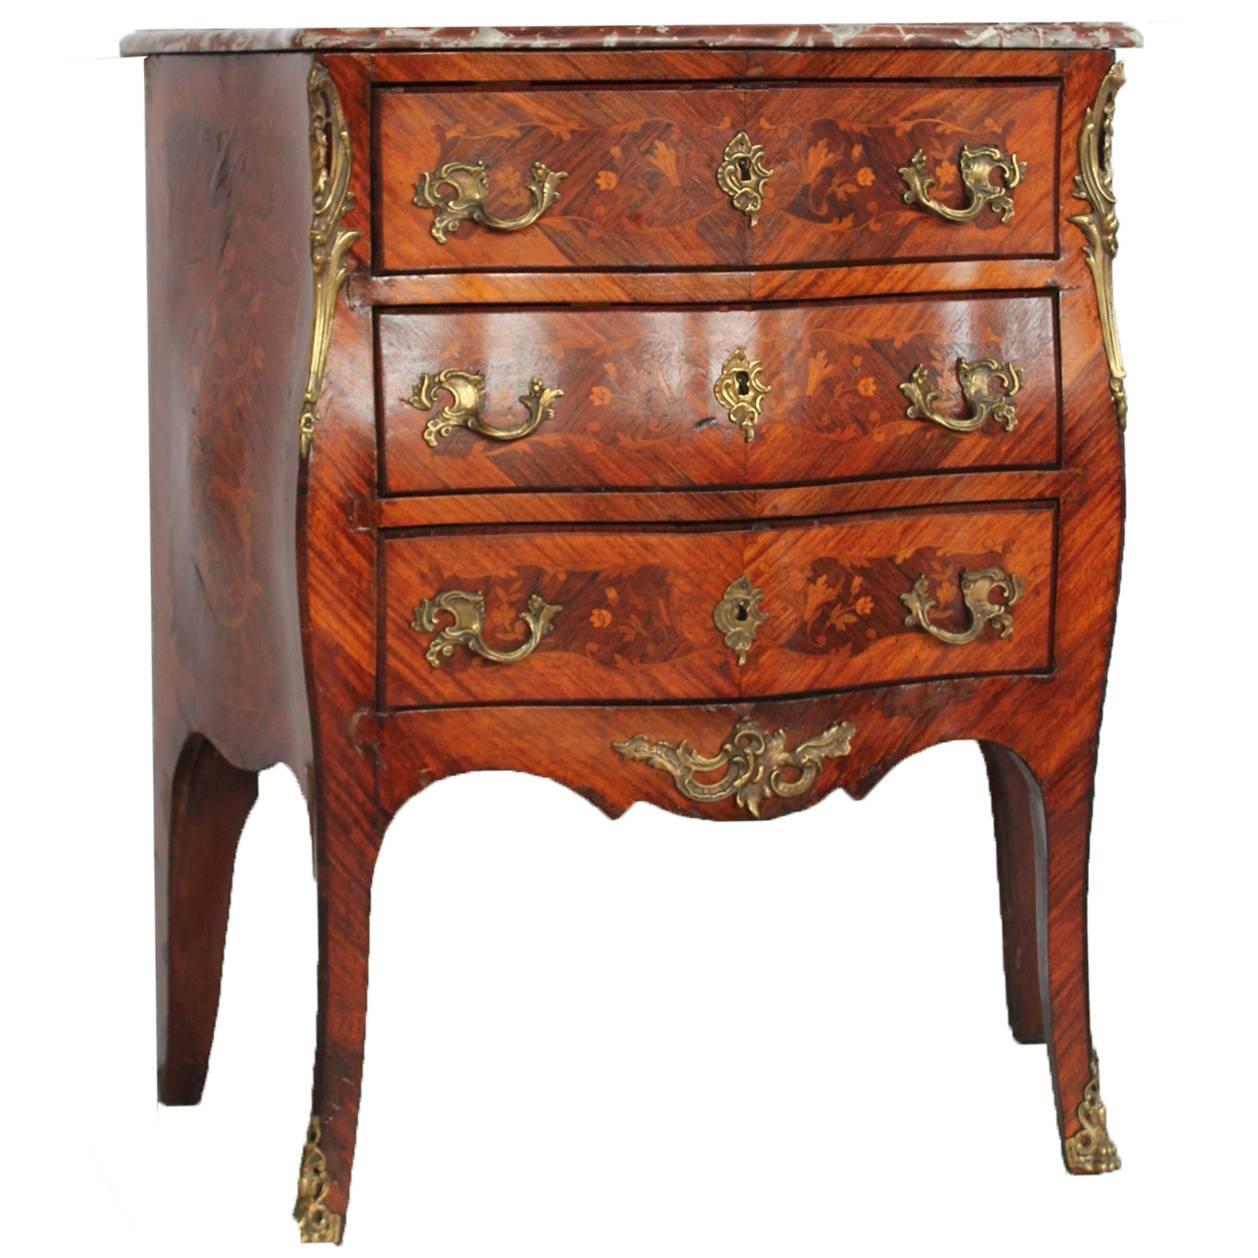 Louis XV Style Marquetry Inlaid Petite Commode, Late 19th-Early 20th Century For Sale